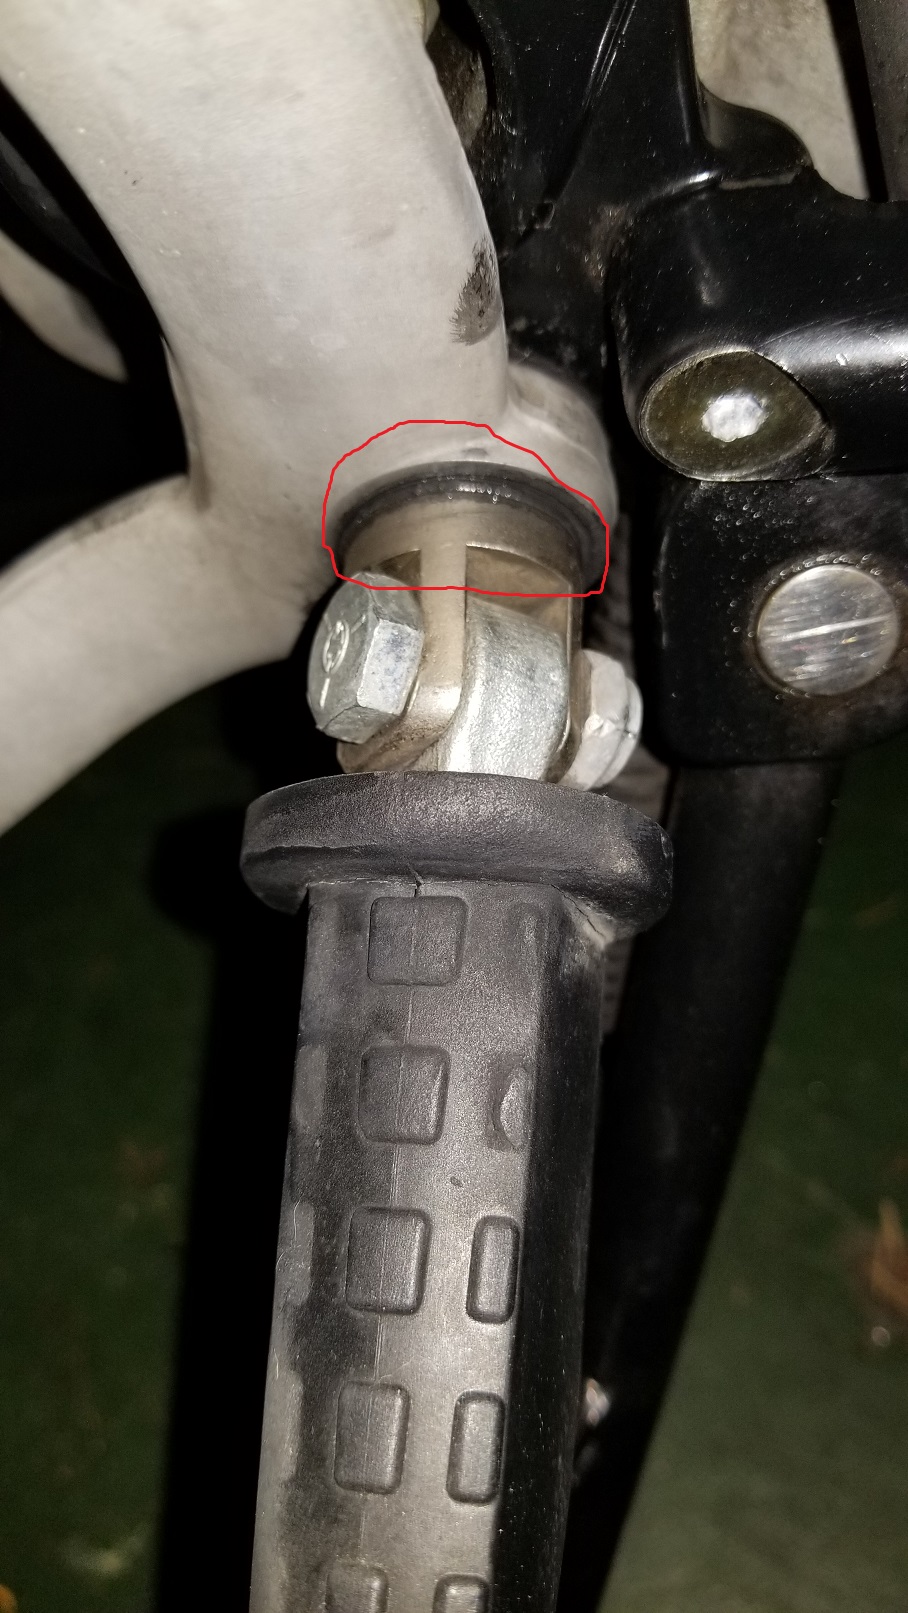 do i need to replace this bushing or get a kit